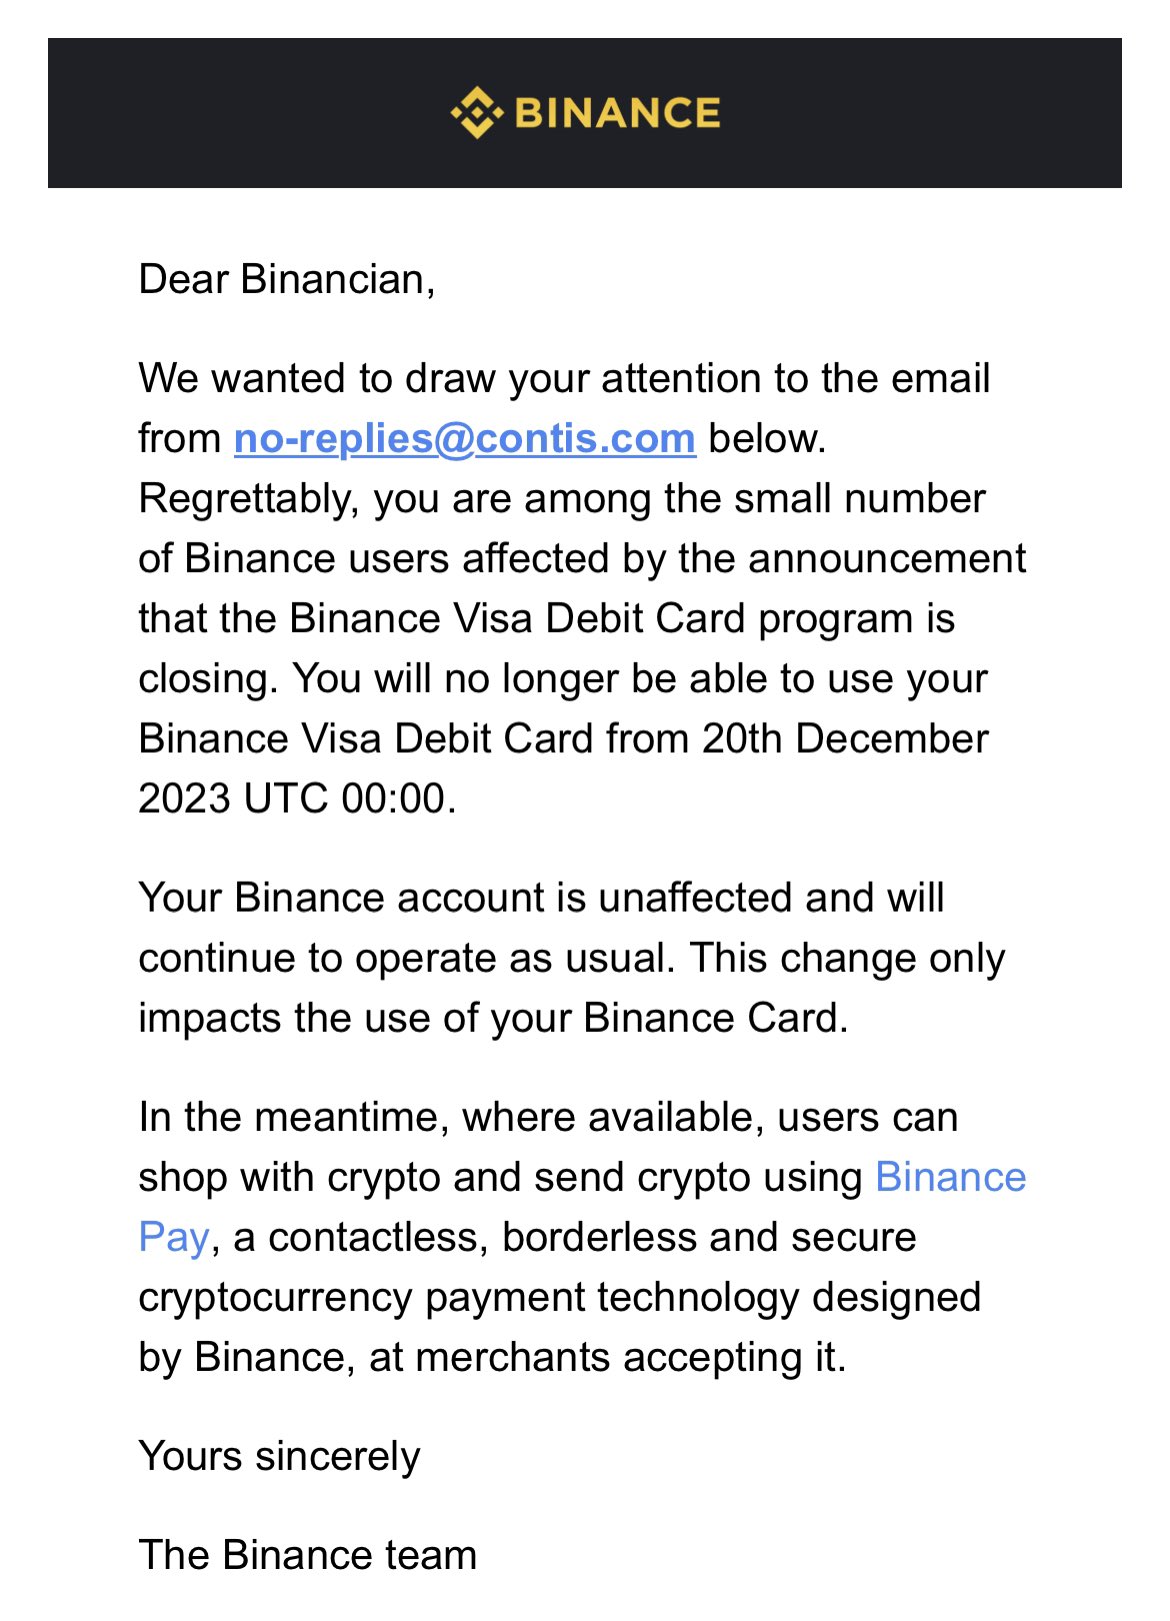 Shift card to close shop after four years of crypto operation